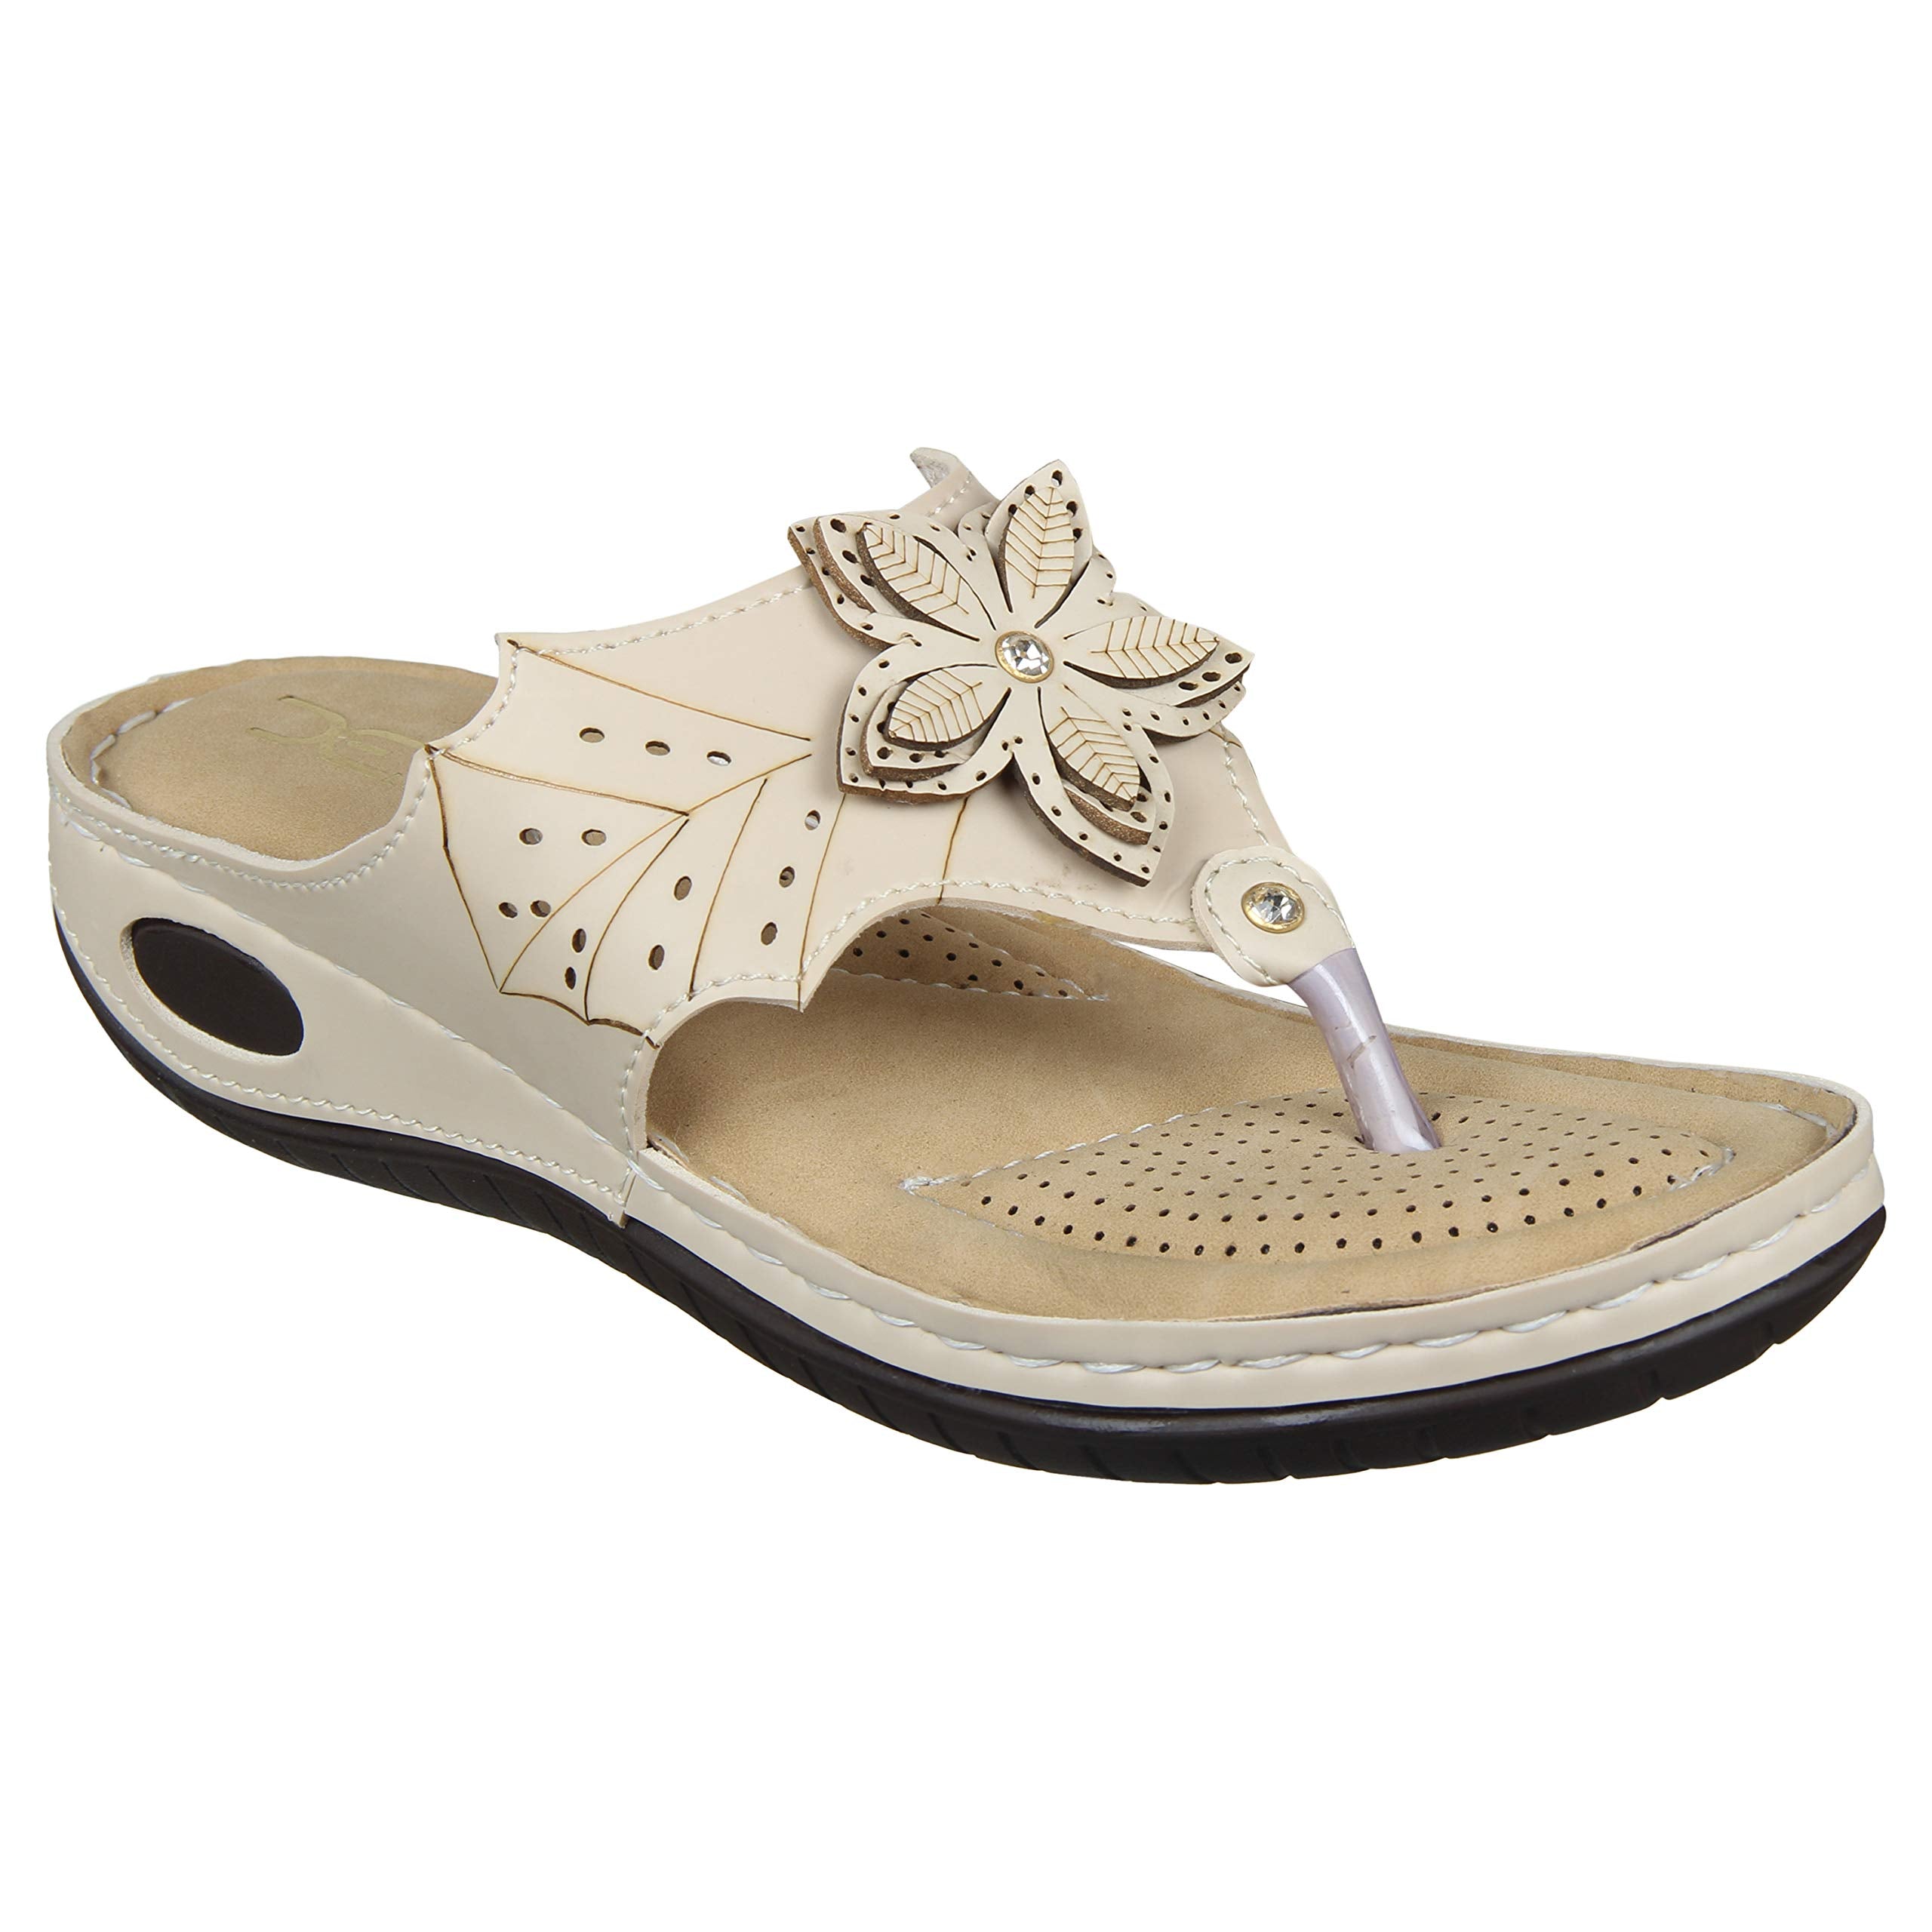 XE Looks Women's Gracious Doctor Sole Flats Sandal (Cream) -  Fashion Slippers in Sri Lanka from Arcade Online Shopping - Just Rs. 5399!